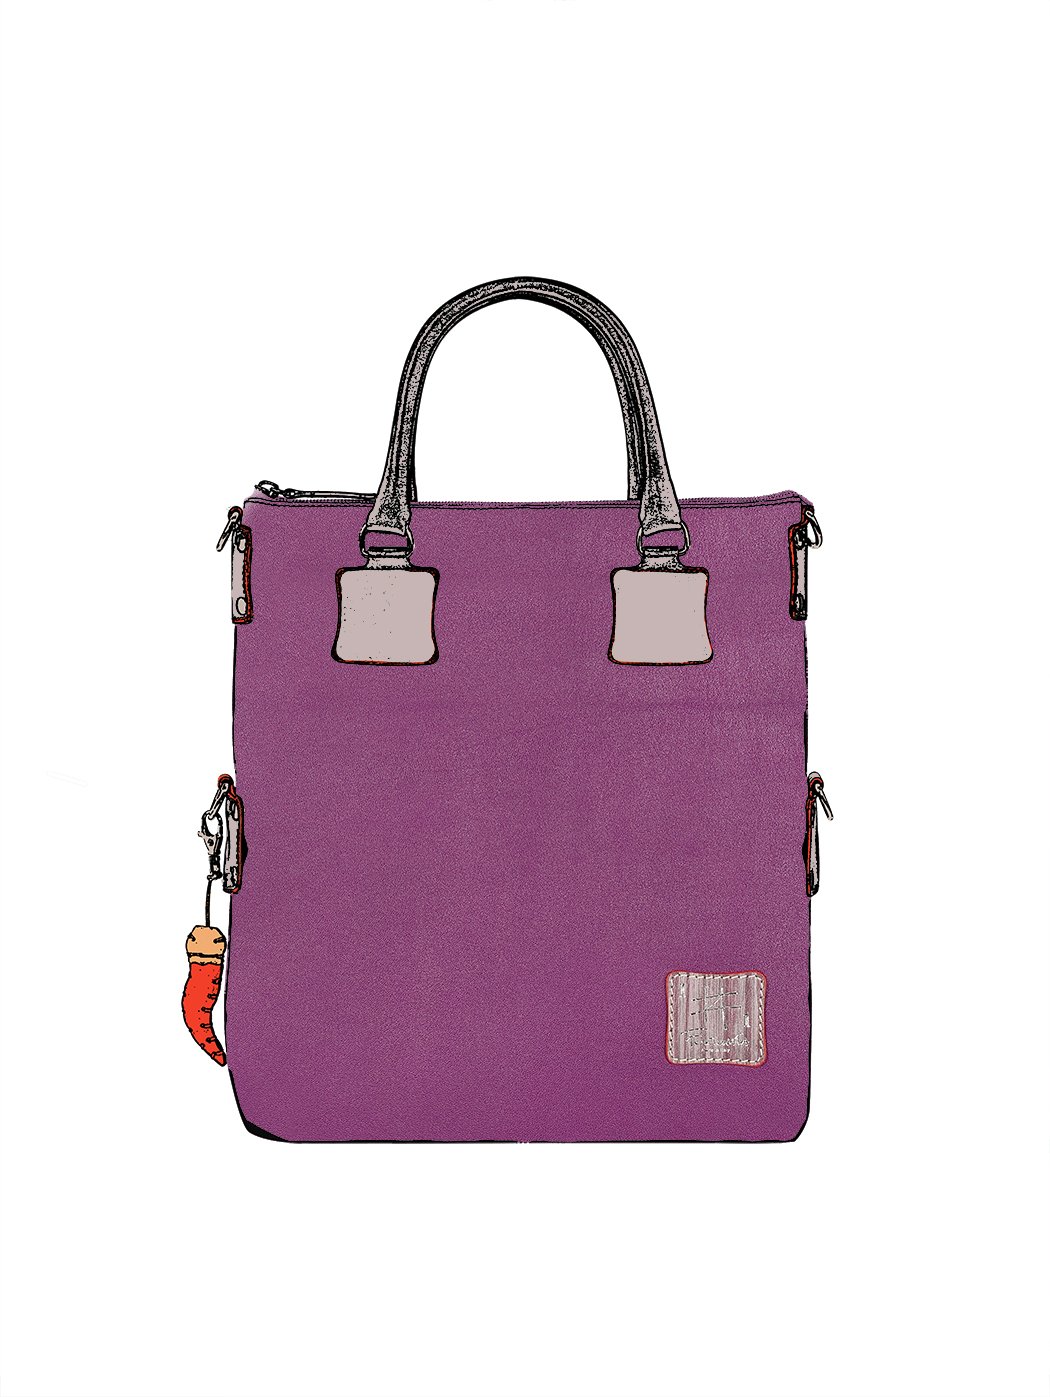 Large Tote Bag in Leather Purple - Handmade in Italy